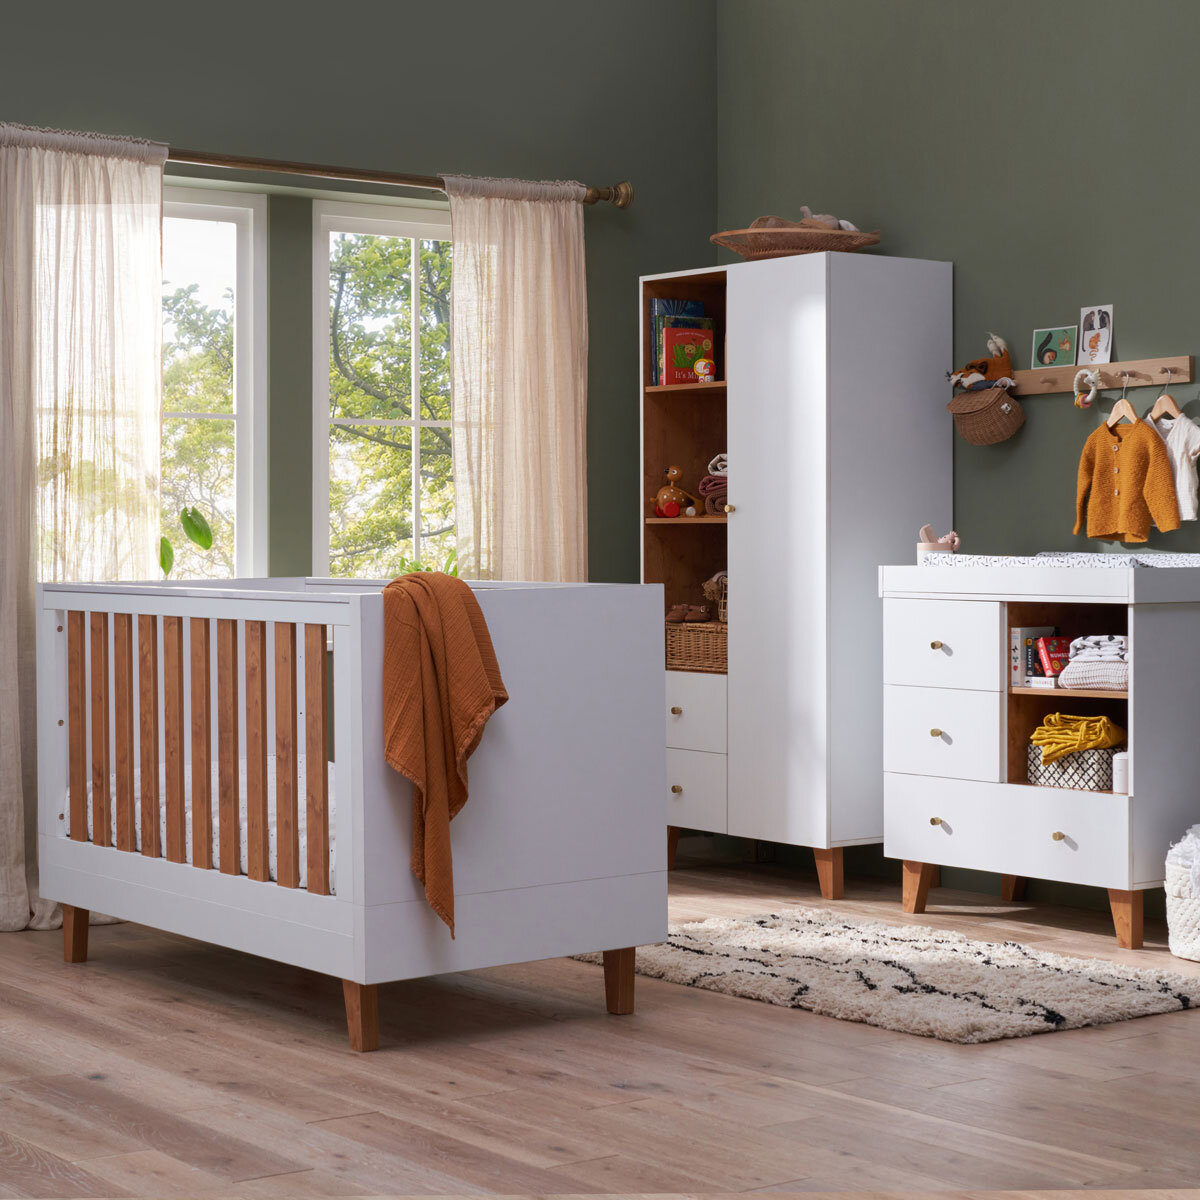 Tutti Bambini Como Cot 4 Piece Room Set, White and Rosewood